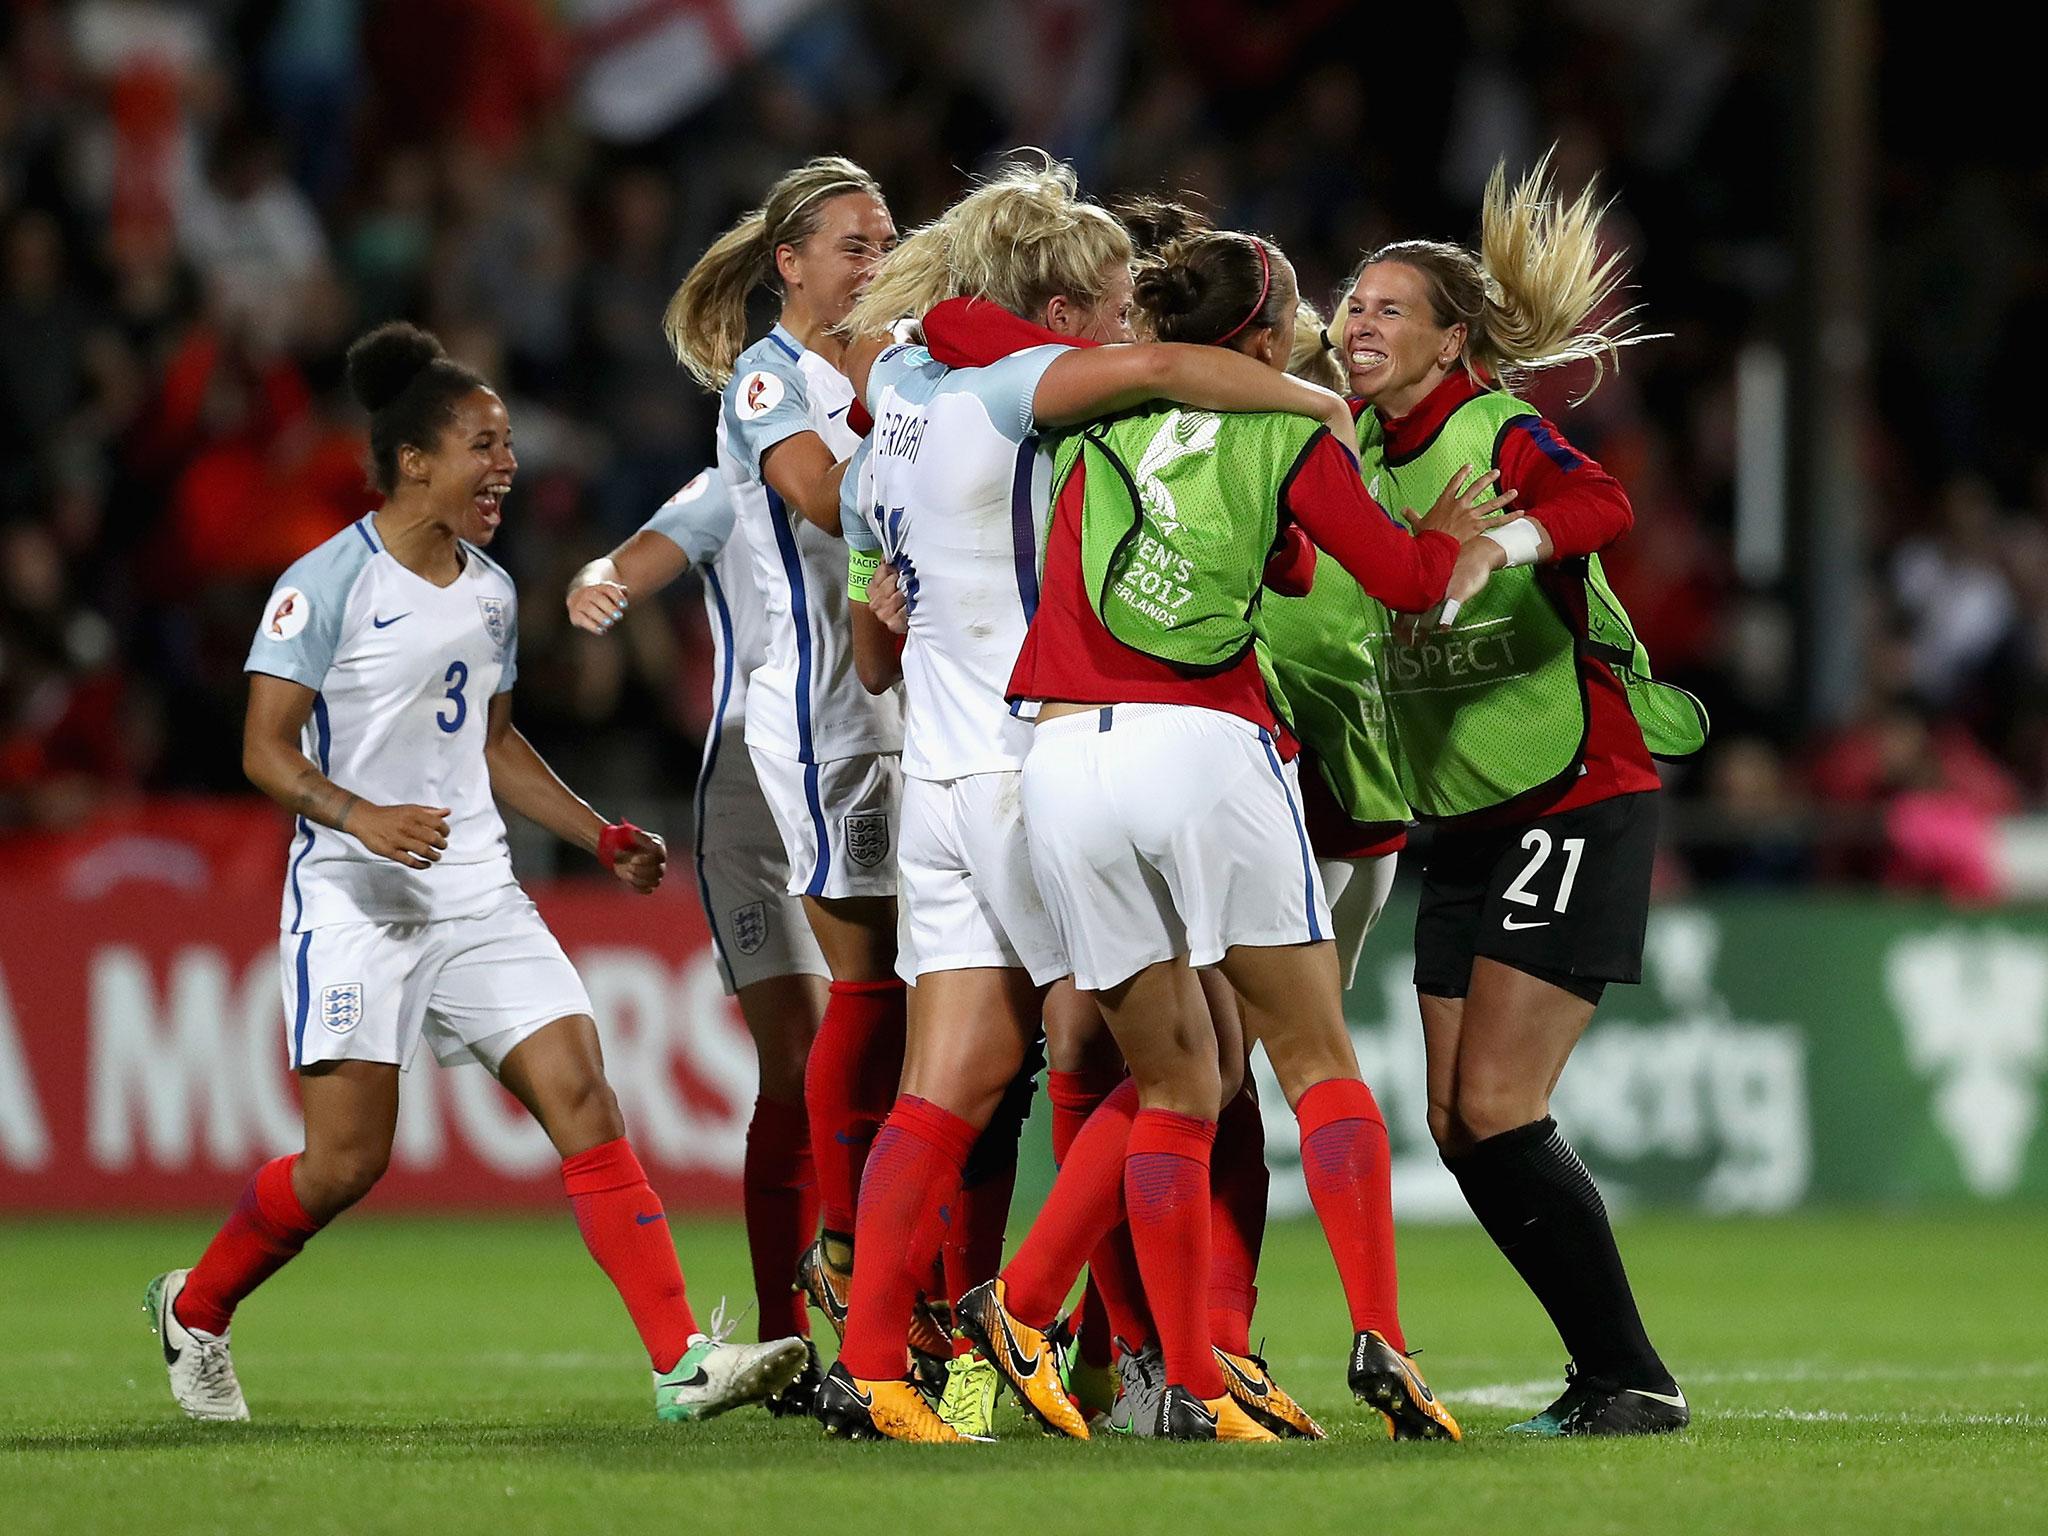 The Football Association intends to bid for the right to host the 2021 European Women's Championship